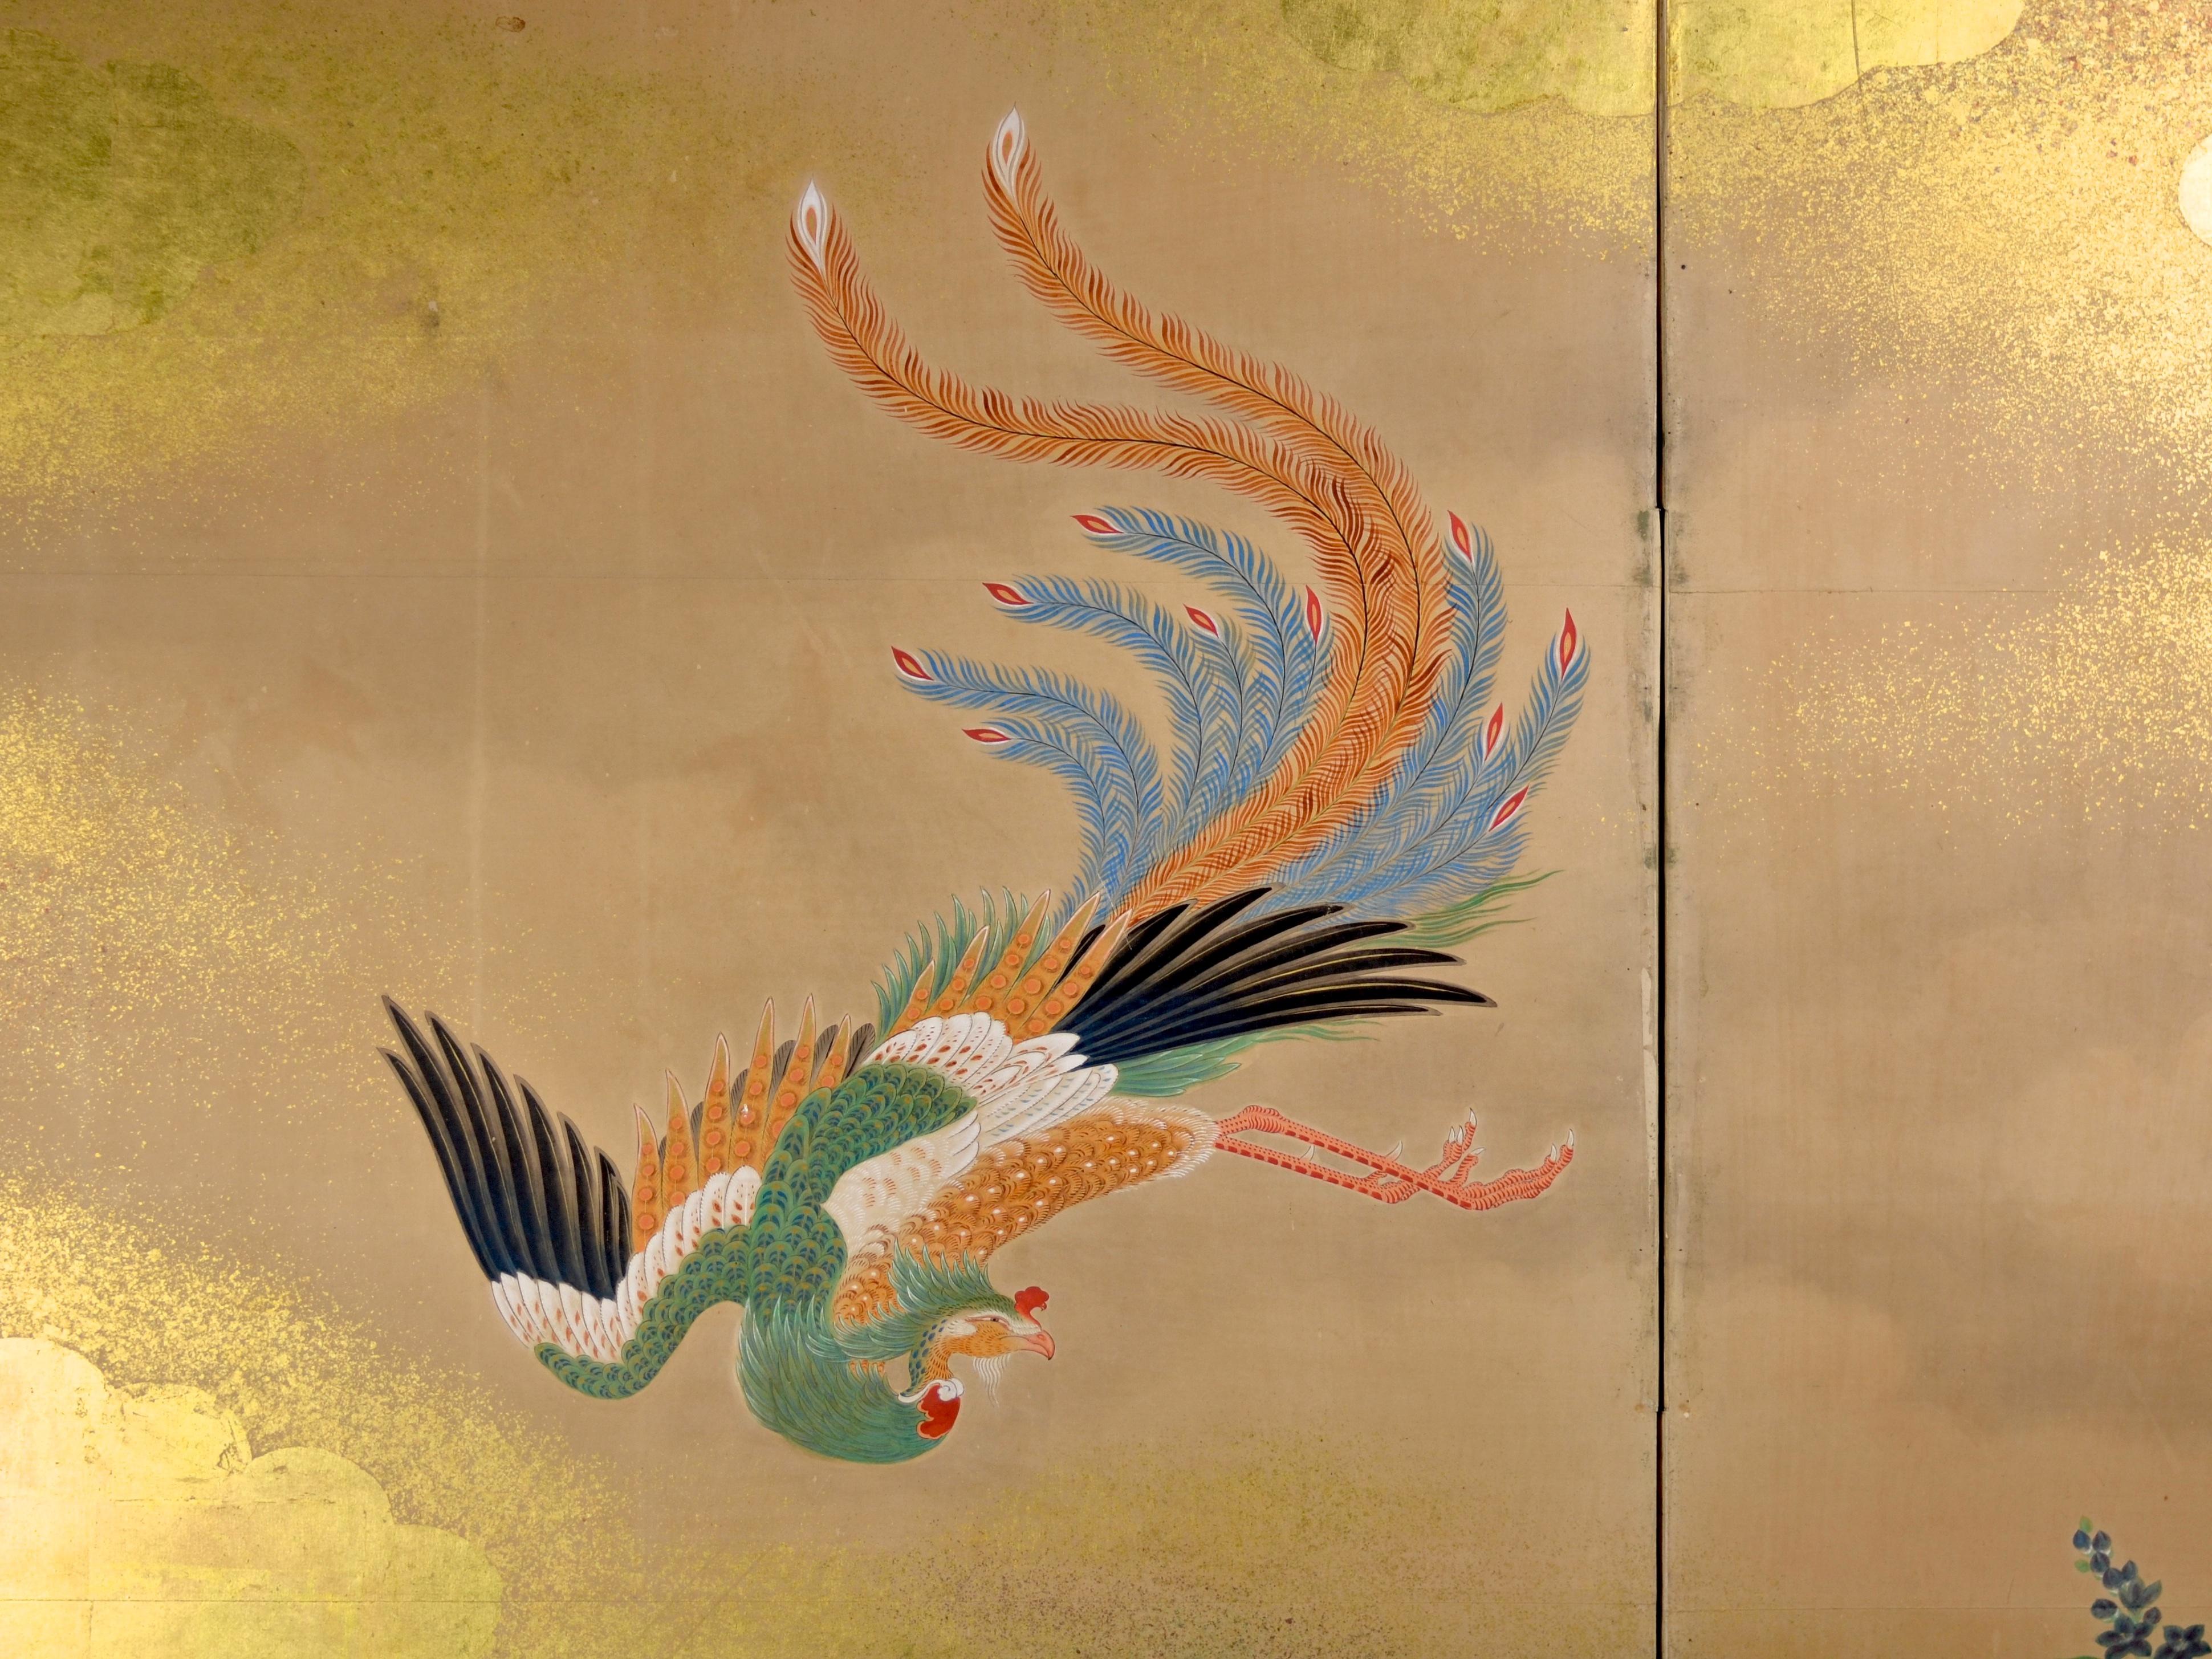 Wonderful two-panel folding screen with painting of a phoenix descending between gold clouds to a river shore where a paulownia tree grows - which is believed to be his resting place. The screen was painted by a master Kano painter, however,